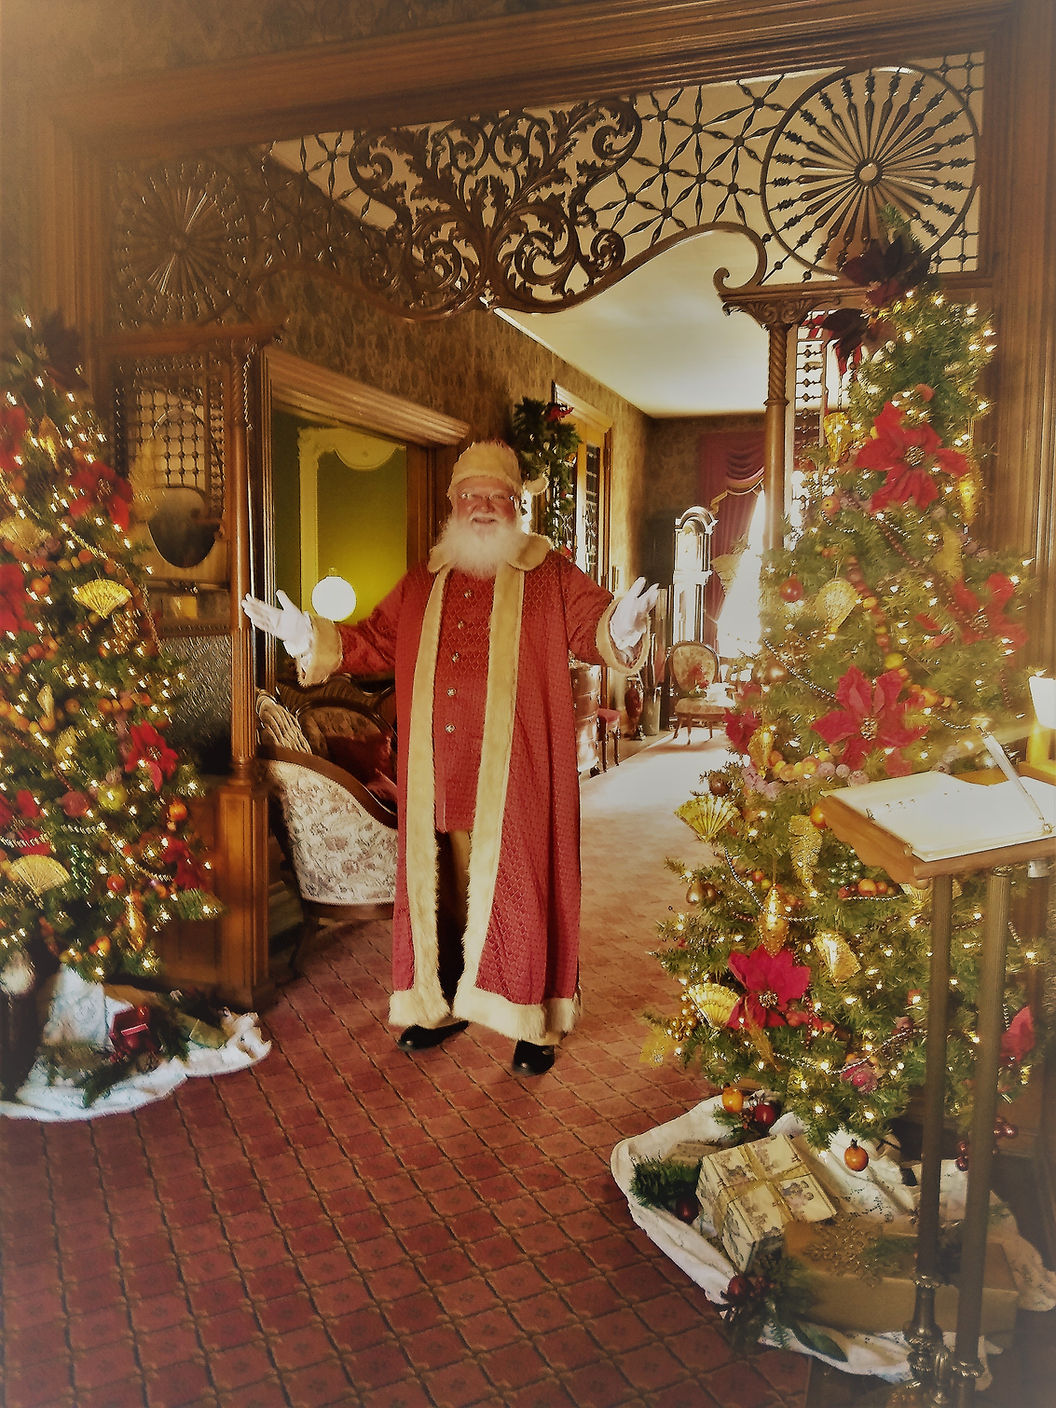 Santa standing in front of Christmas trees in the hallway